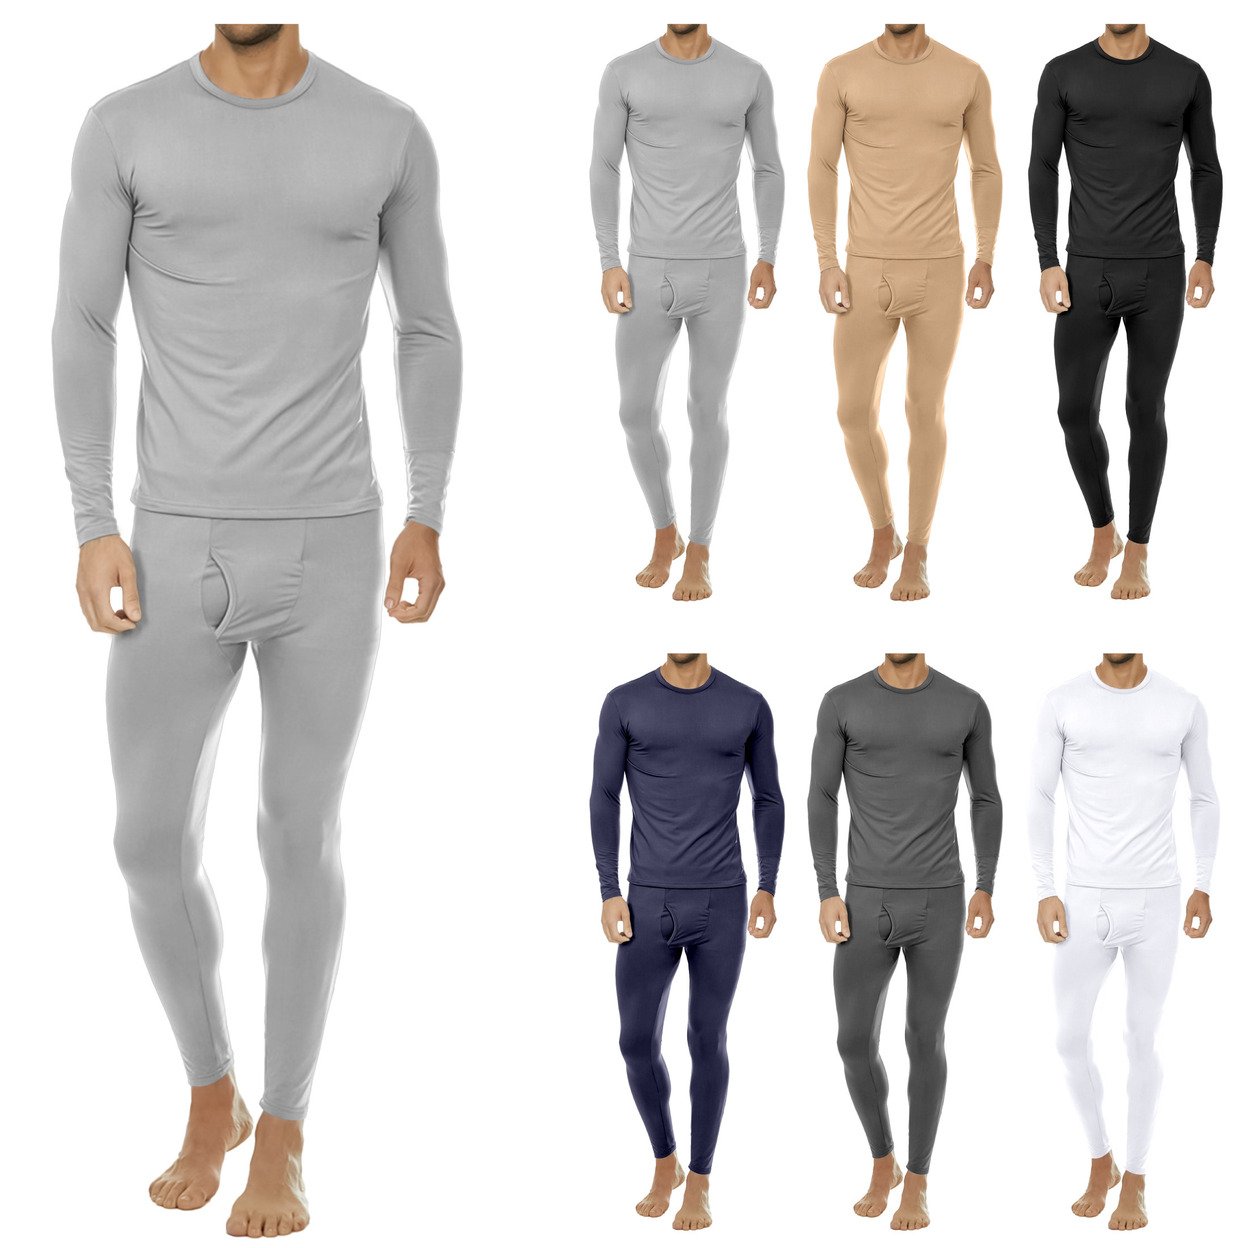 2-Sets: Men's Winter Warm Fleece Lined Thermal Underwear Set For Cold Weather - Black&white, Small